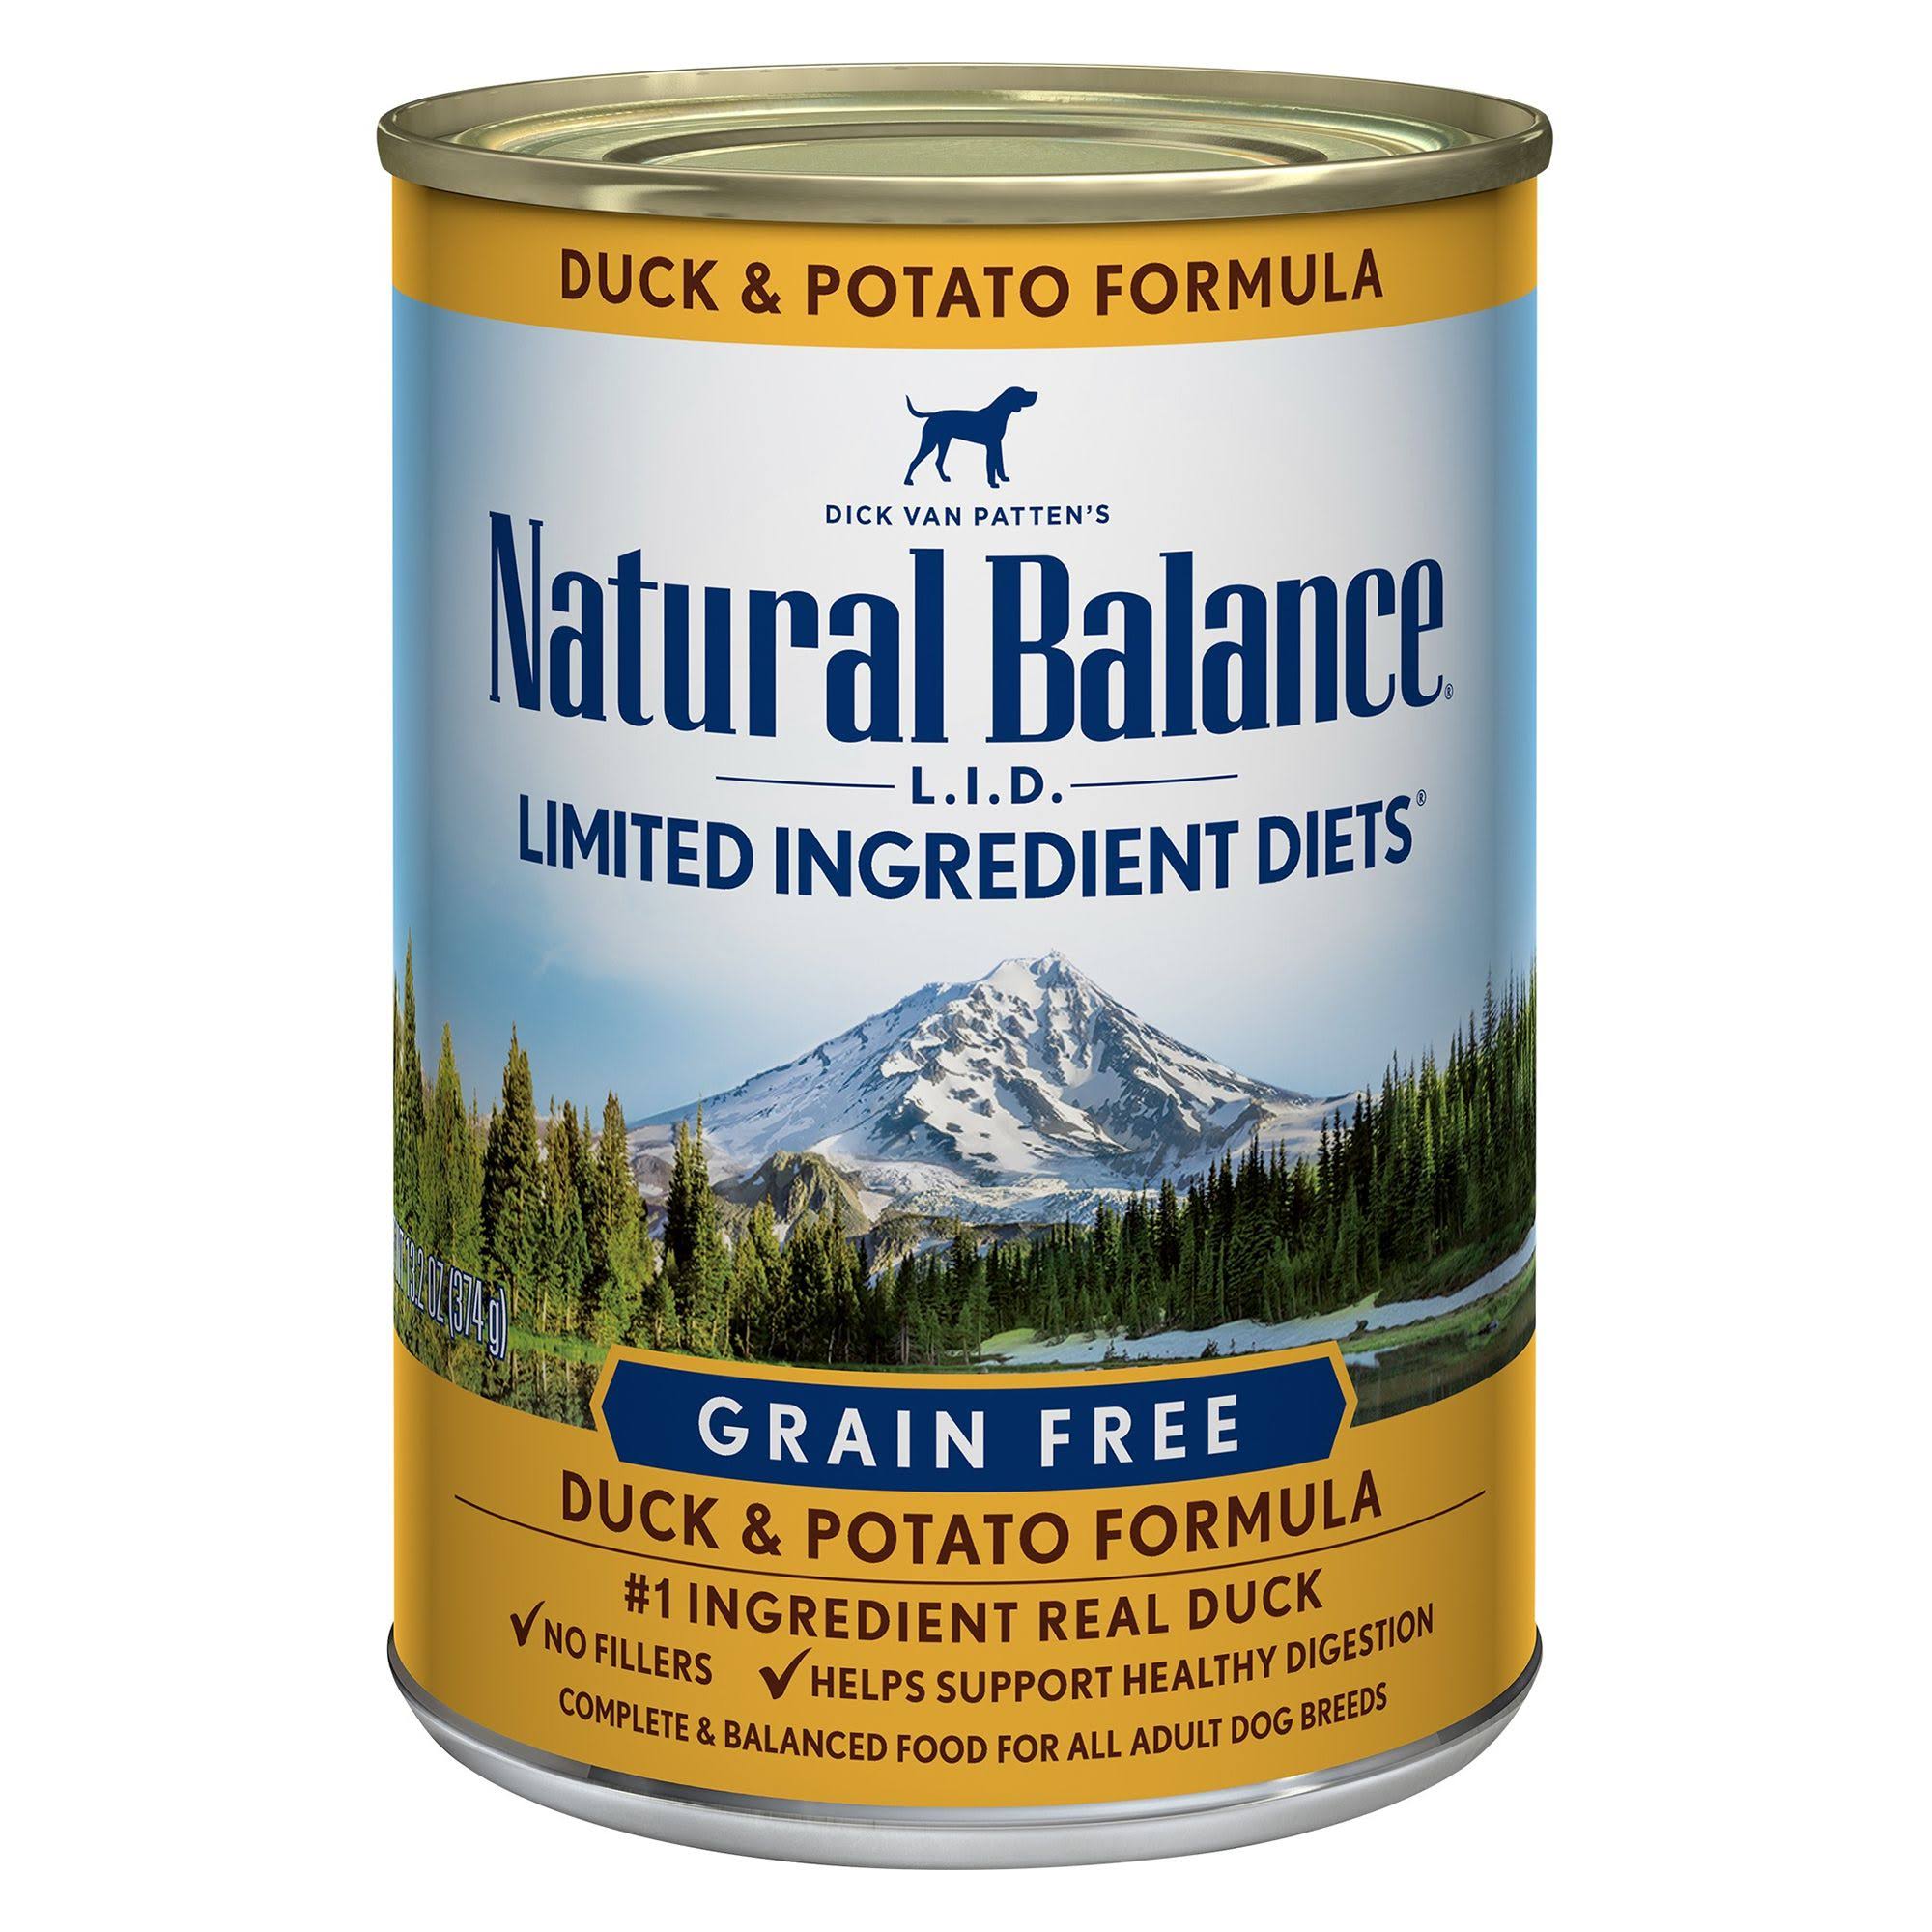 Naatural Balance Limited Ingredient Diets Dog Food - Duck And Potato Formula, 374g